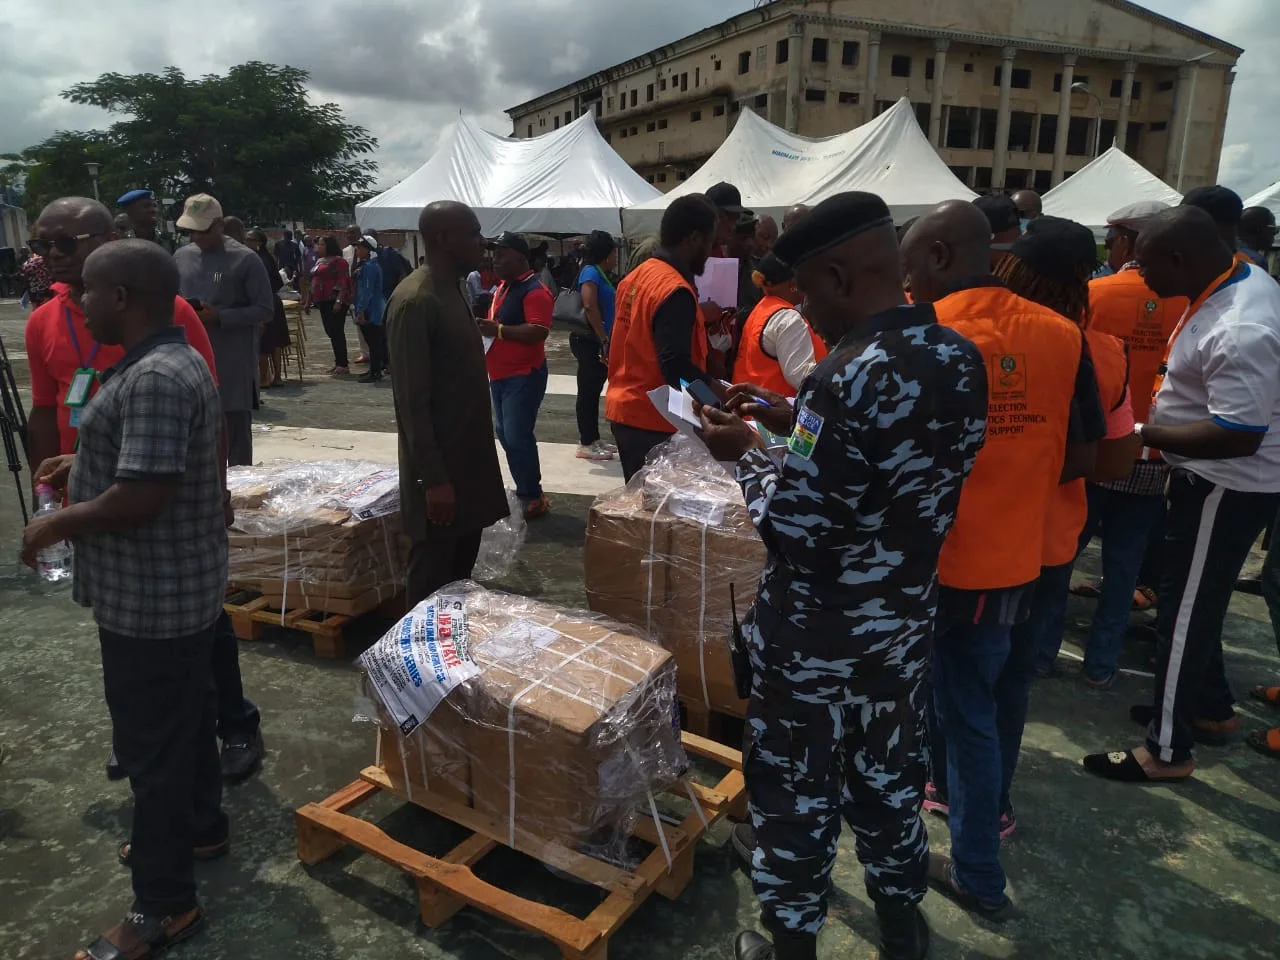 Imo Election: INEC Begins Distribution Of Sensitive Election Materials